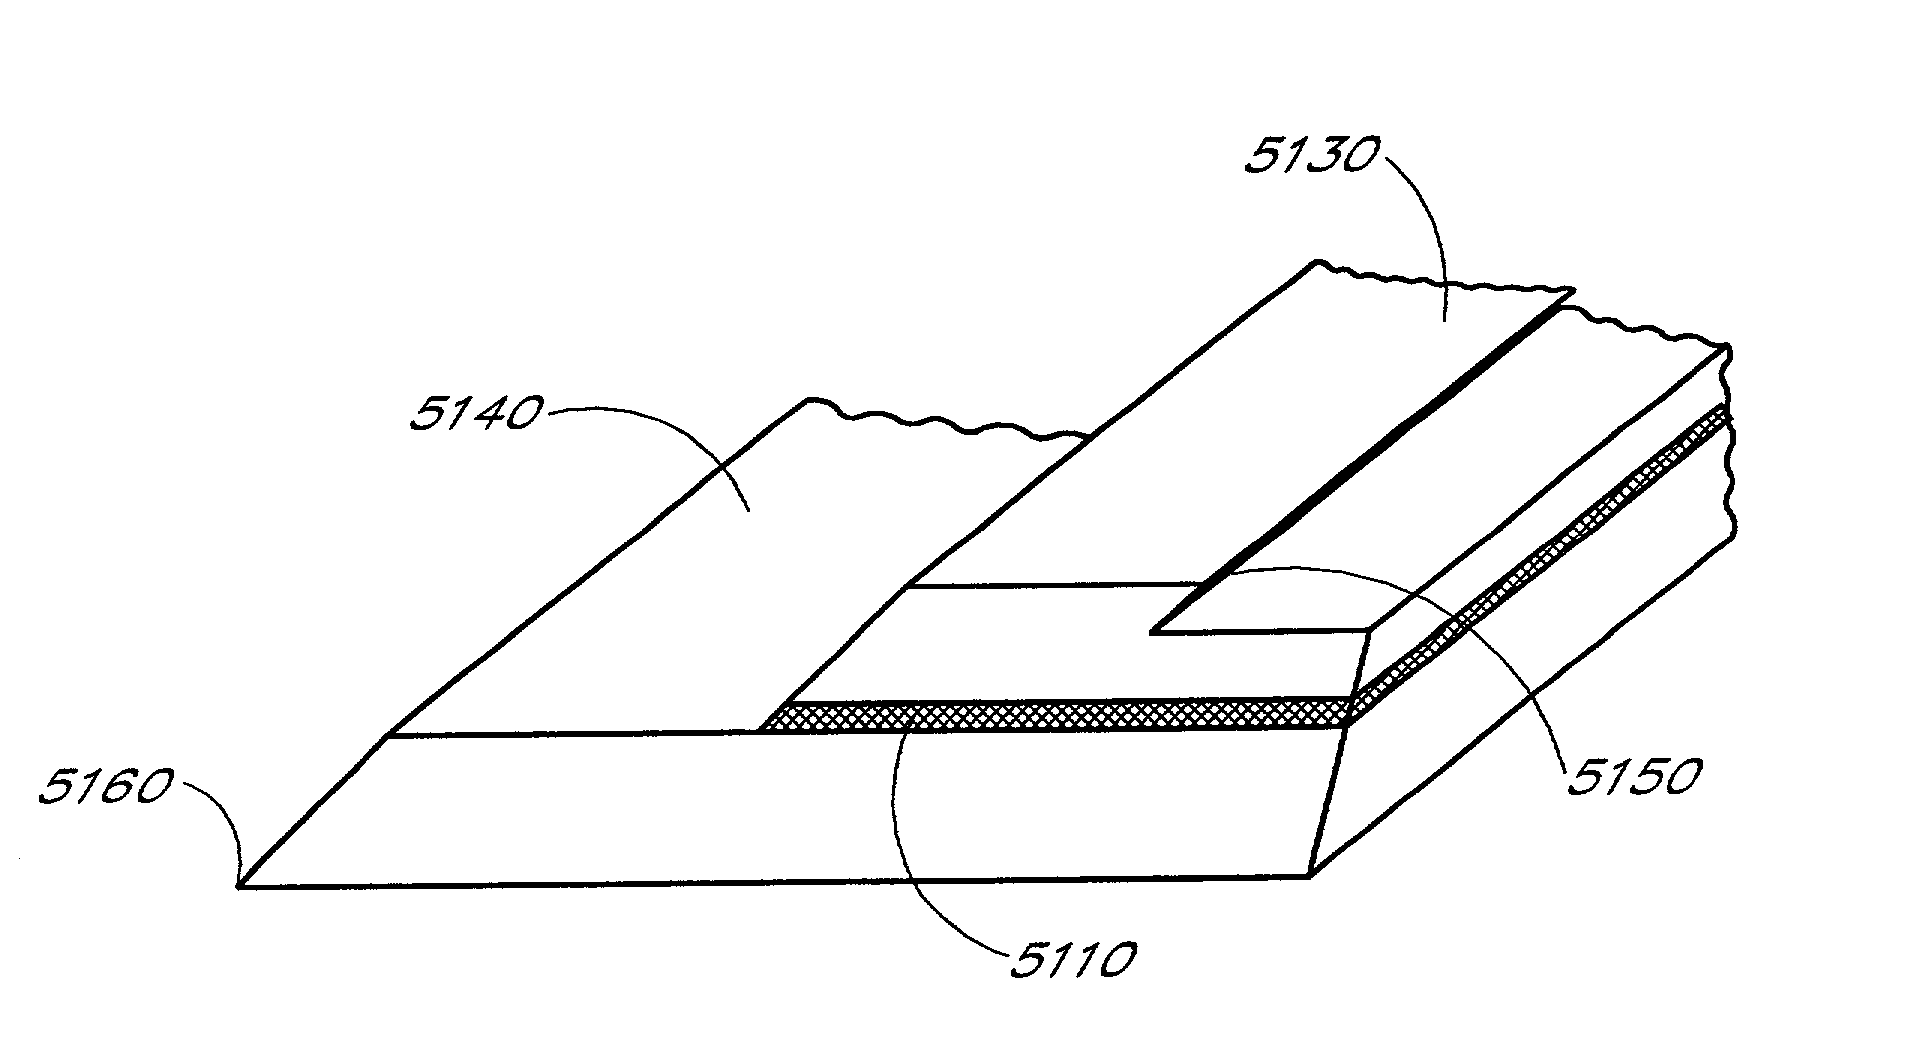 Reinforced fiber cement article and methods of making and installing the same